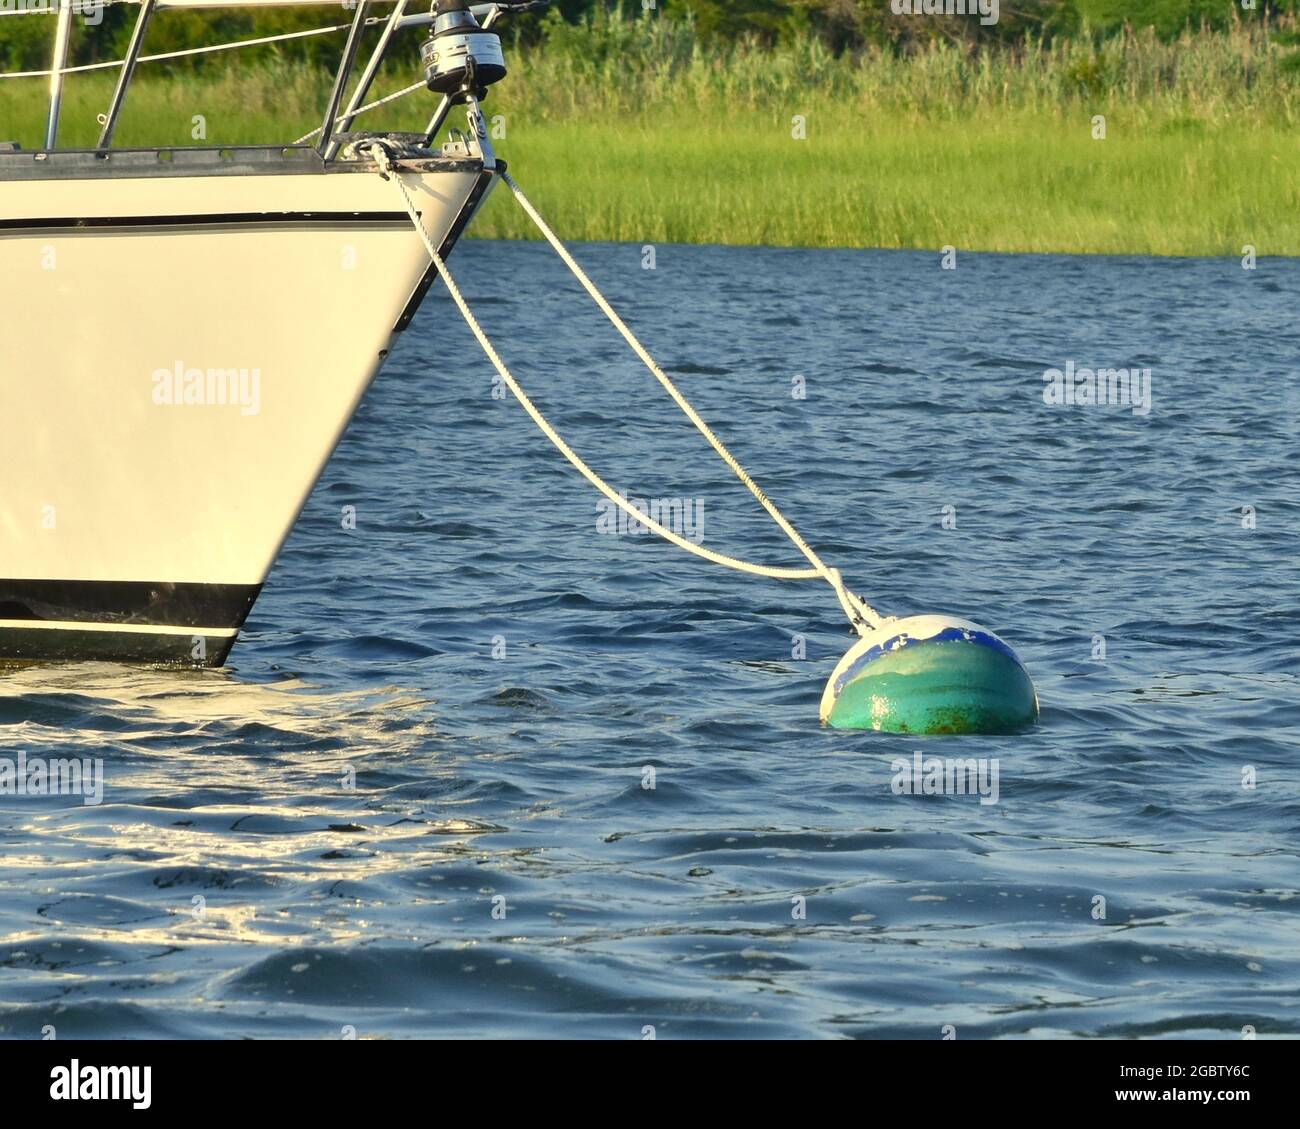 Sailboat at mooring with marsh grass in background. Setauket Harbor, Long Island, New York. Copy space. Stock Photo